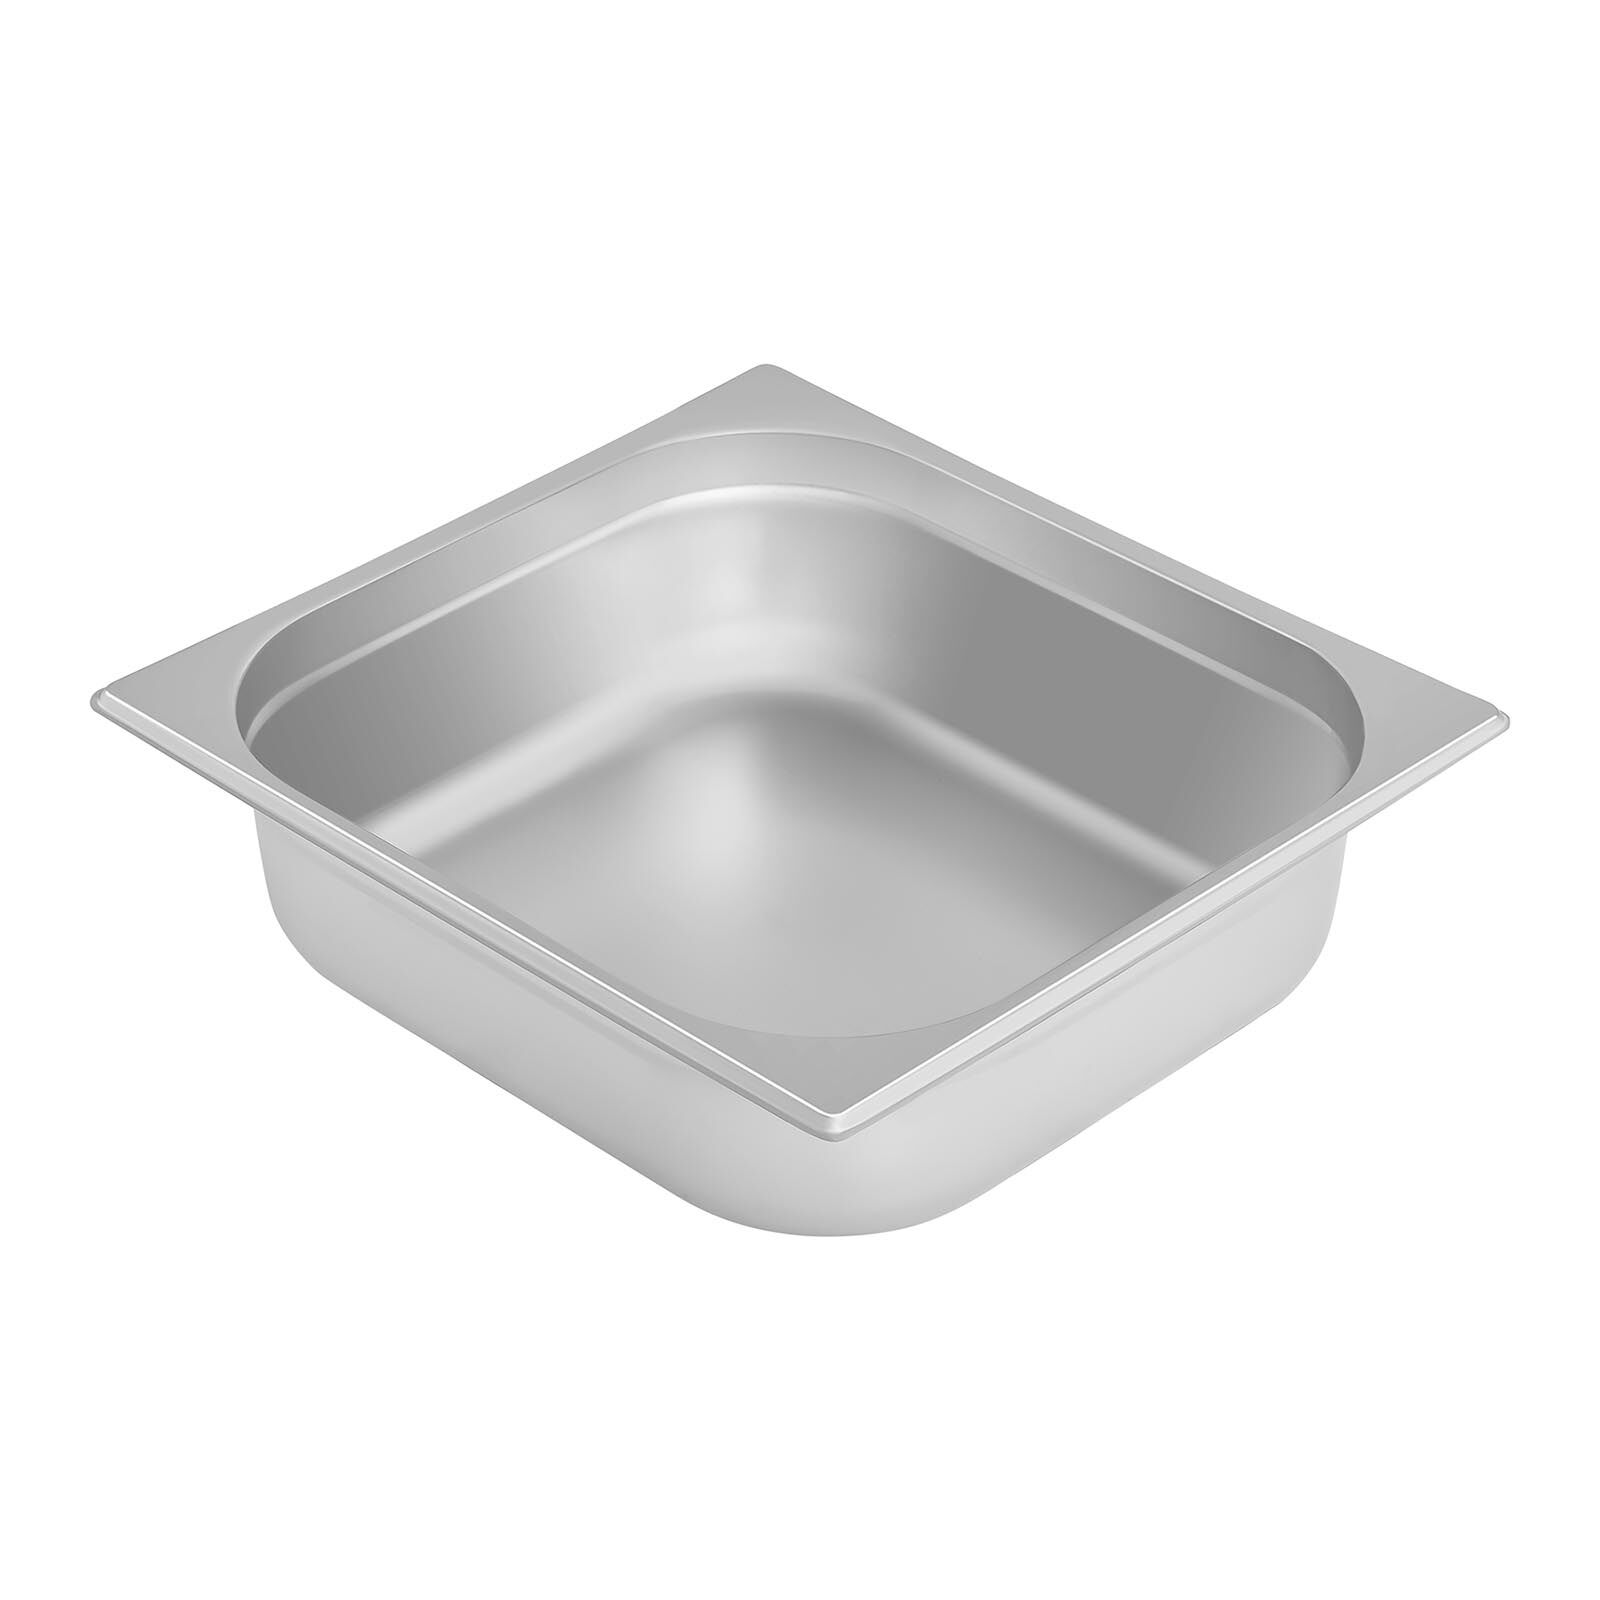 Royal Catering Gastronorm Tray - 2/3 - 100 mm